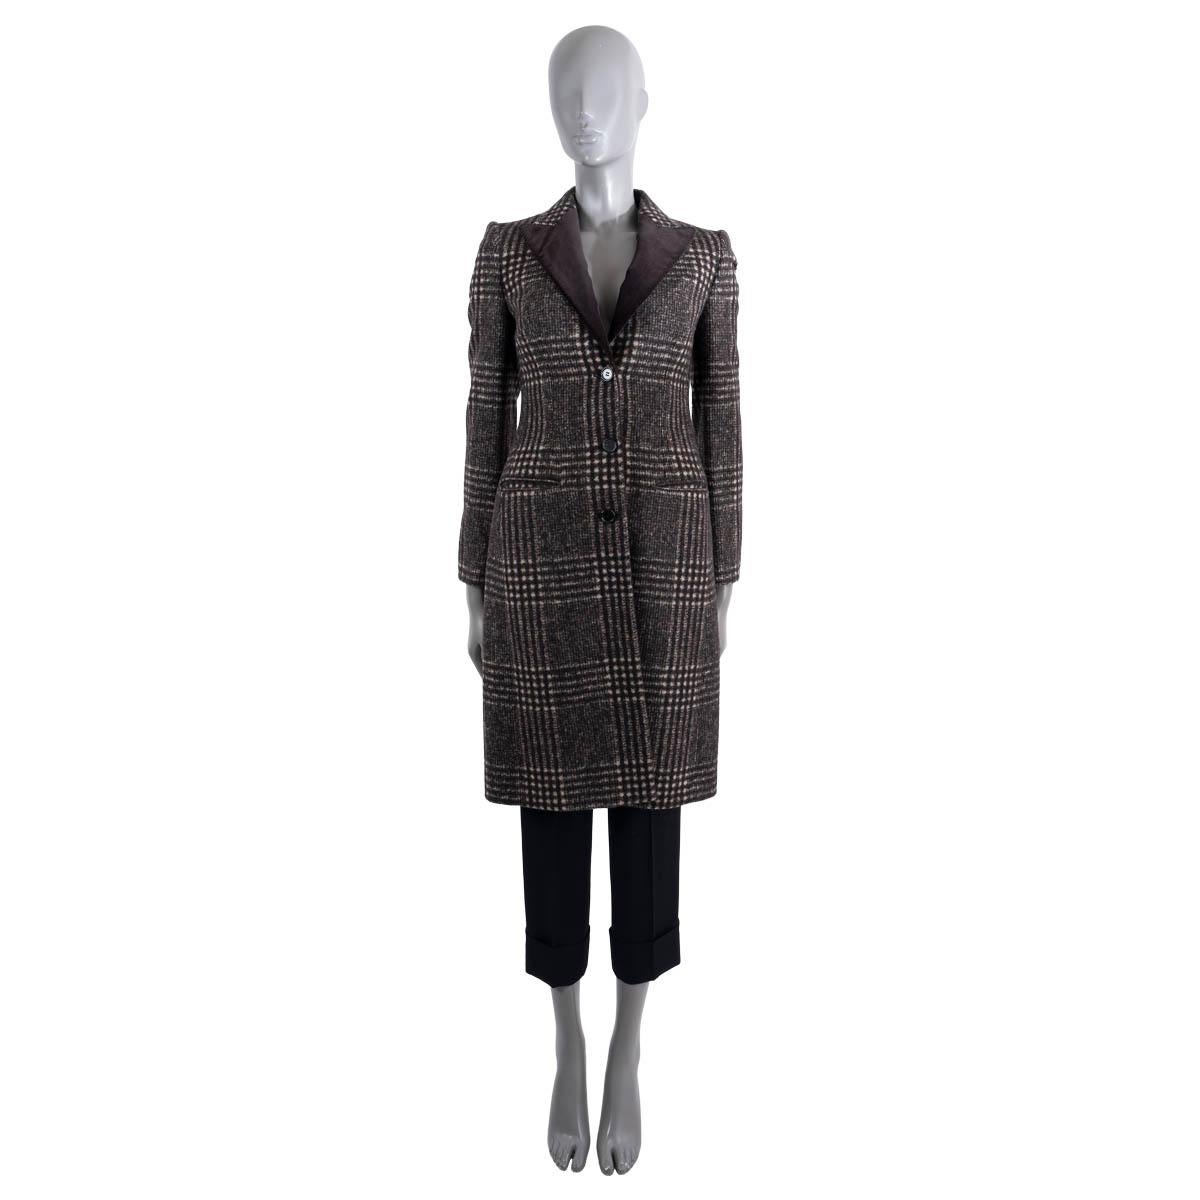 100% authentic Dolce & Gabbana single-breasted coat in brown Prince of Wales check wool (46%), alpaca (26%), cotton (16%), polyamide (8%) and elastane (2%). Featues wingtip lapels in dark brown velvet and two slit pockets at the waist. Closes with